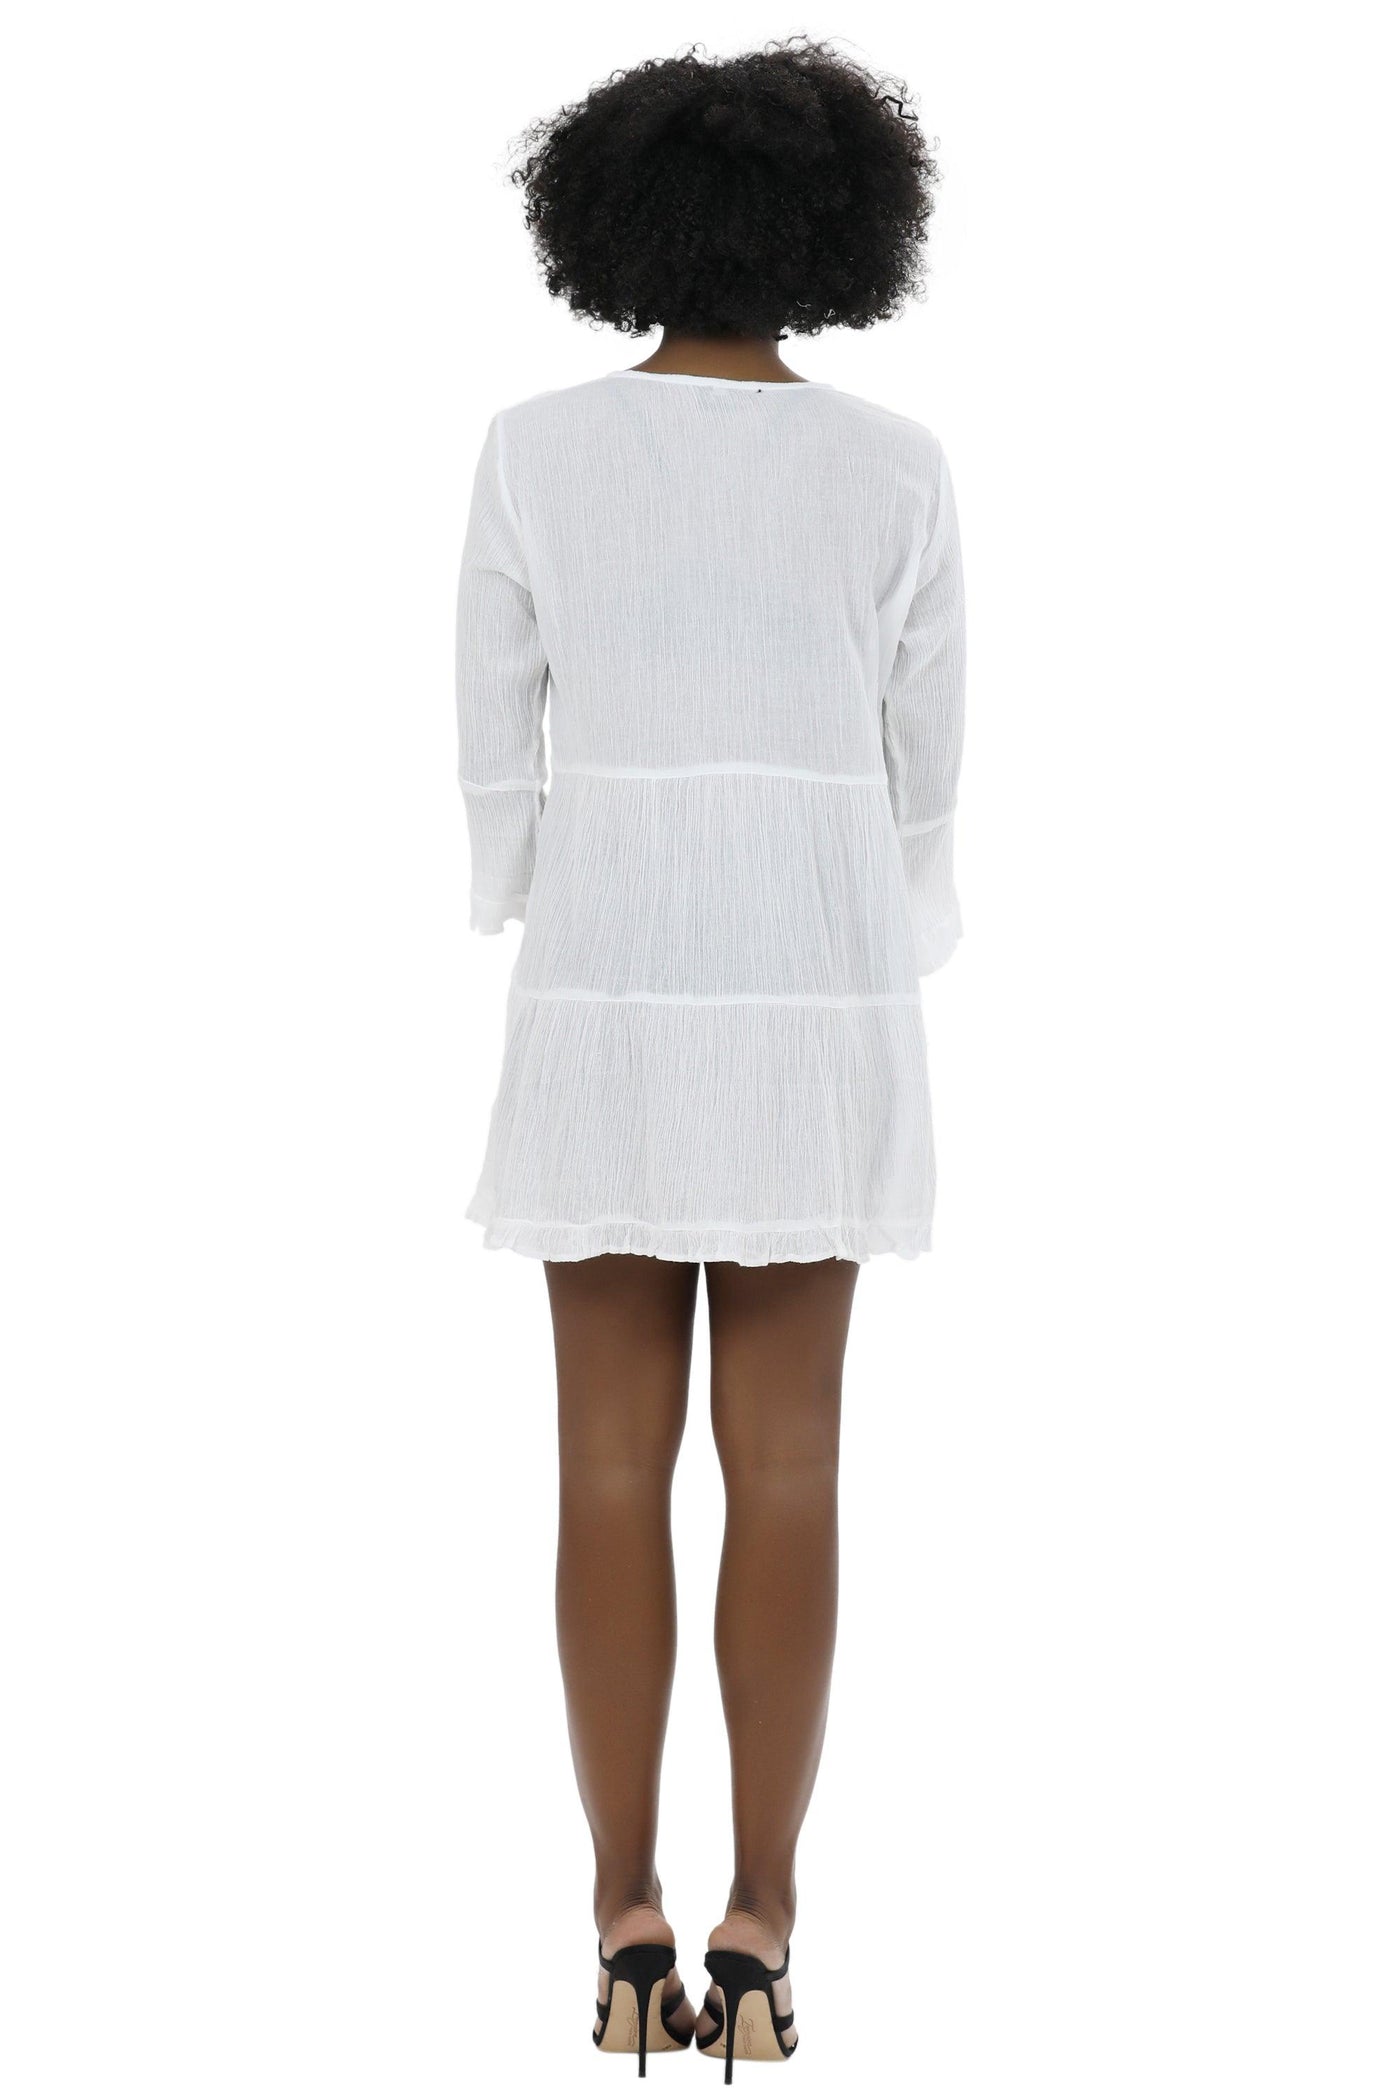 Long Sleeve Hand Embroidered White Dress WD-21113  - Advance Apparels Inc